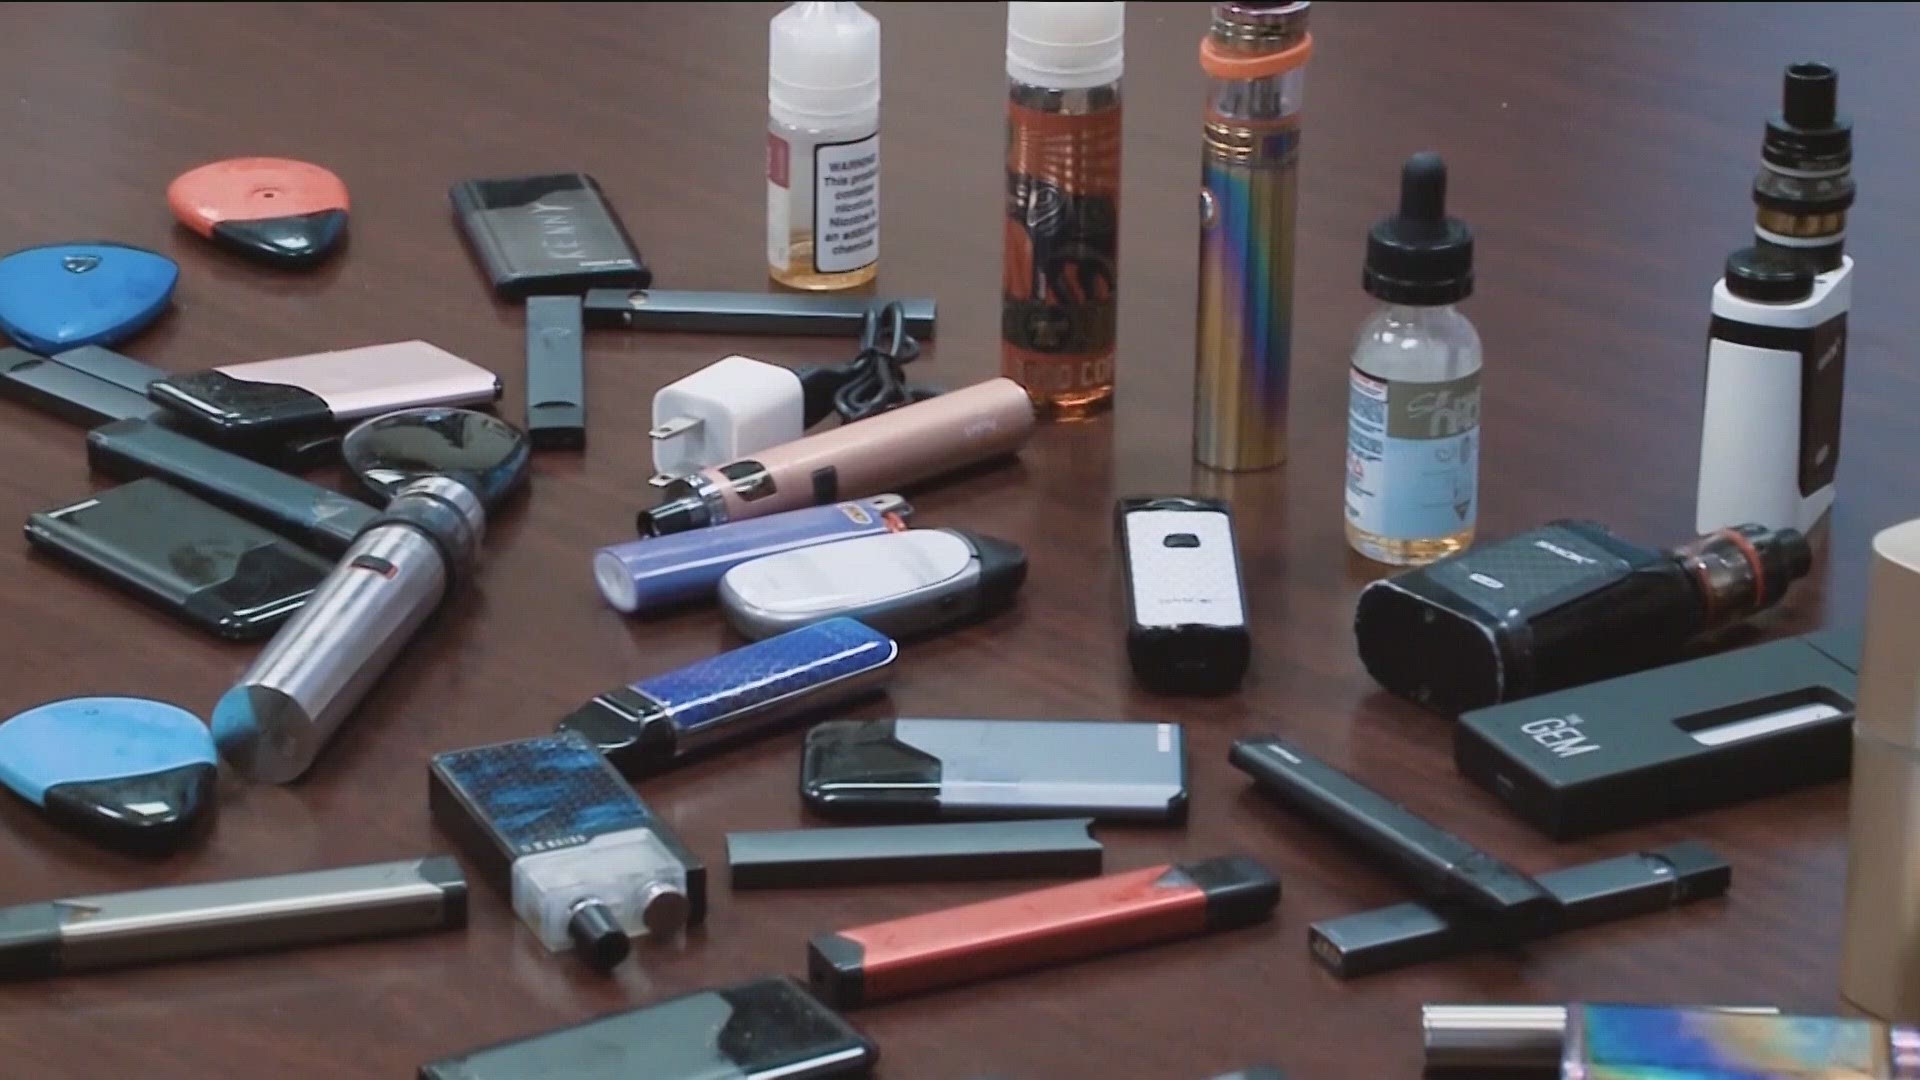 Online businesses are selling highlighters, hoodies, and even water bottle-shaped vape pens.